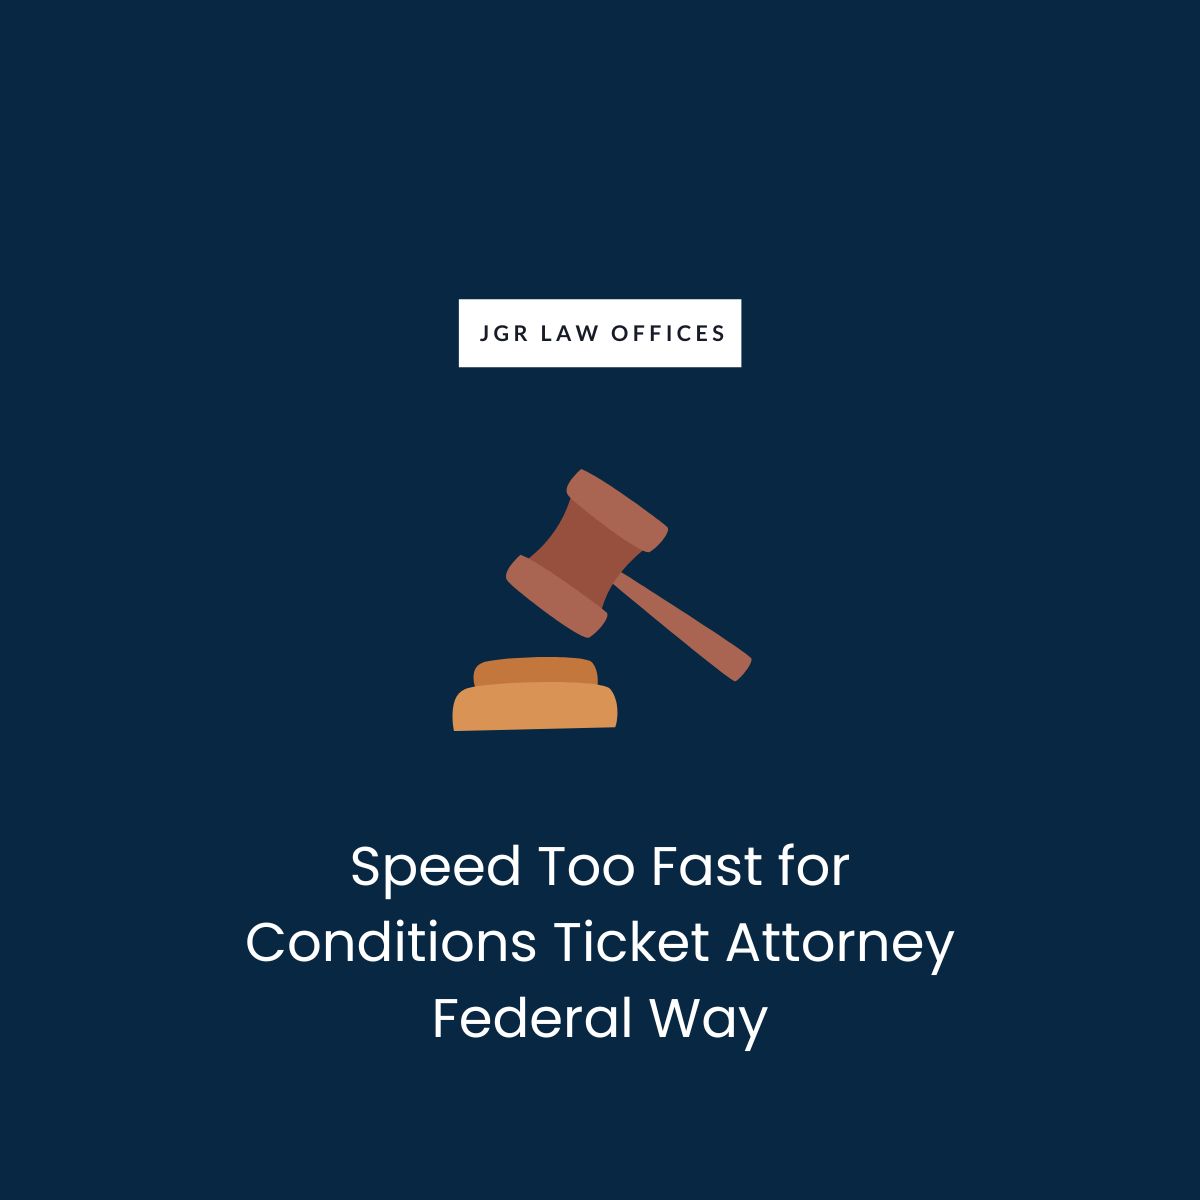 Speed Too Fast for Conditions Ticket Attorney Federal Way